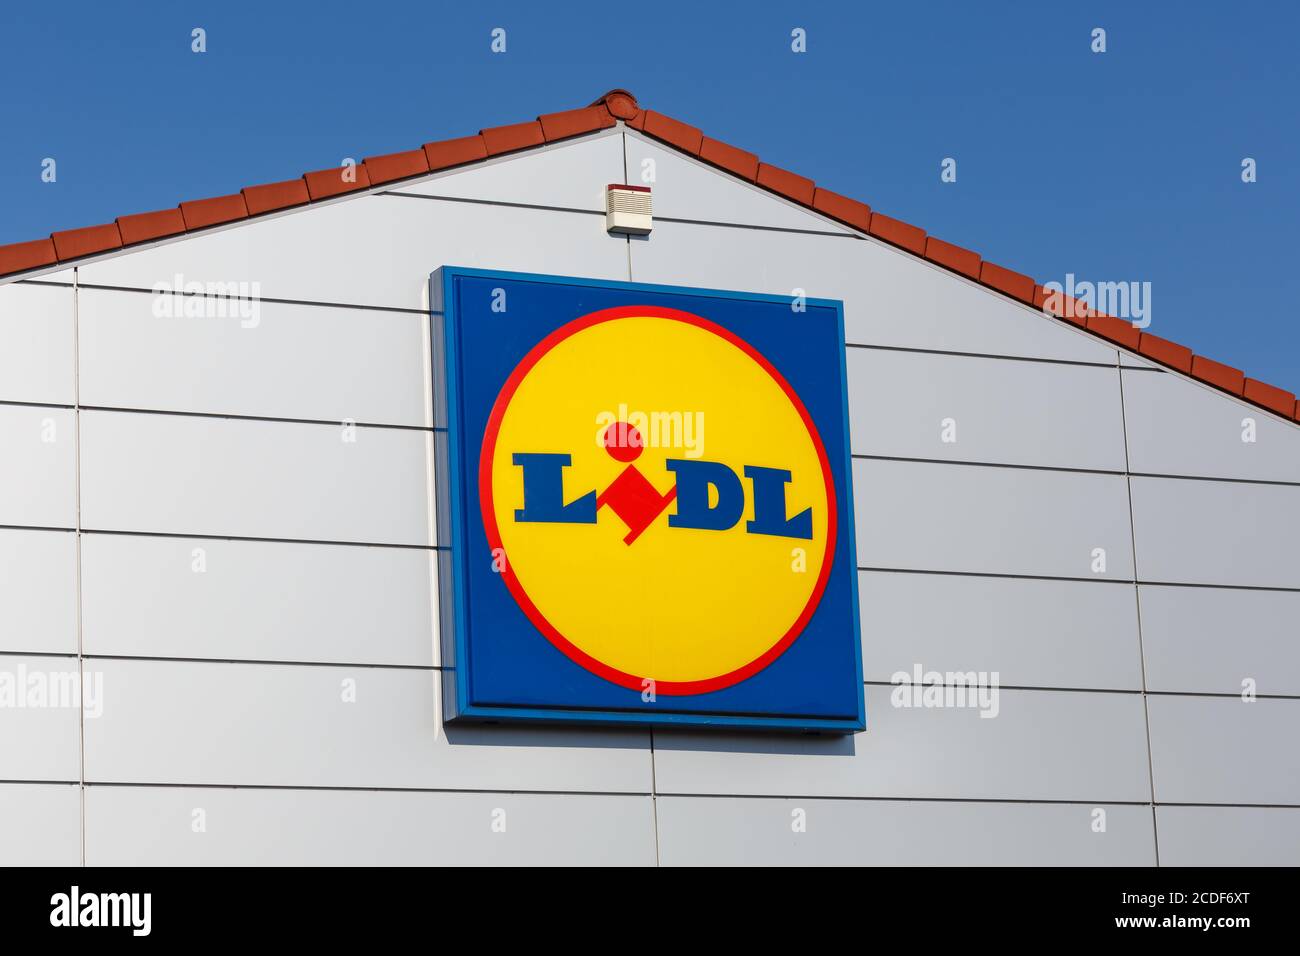 Stuttgart, Germany - May 17, 2020: Lidl logo sign supermarket discount shop discounter in Germany. Stock Photo